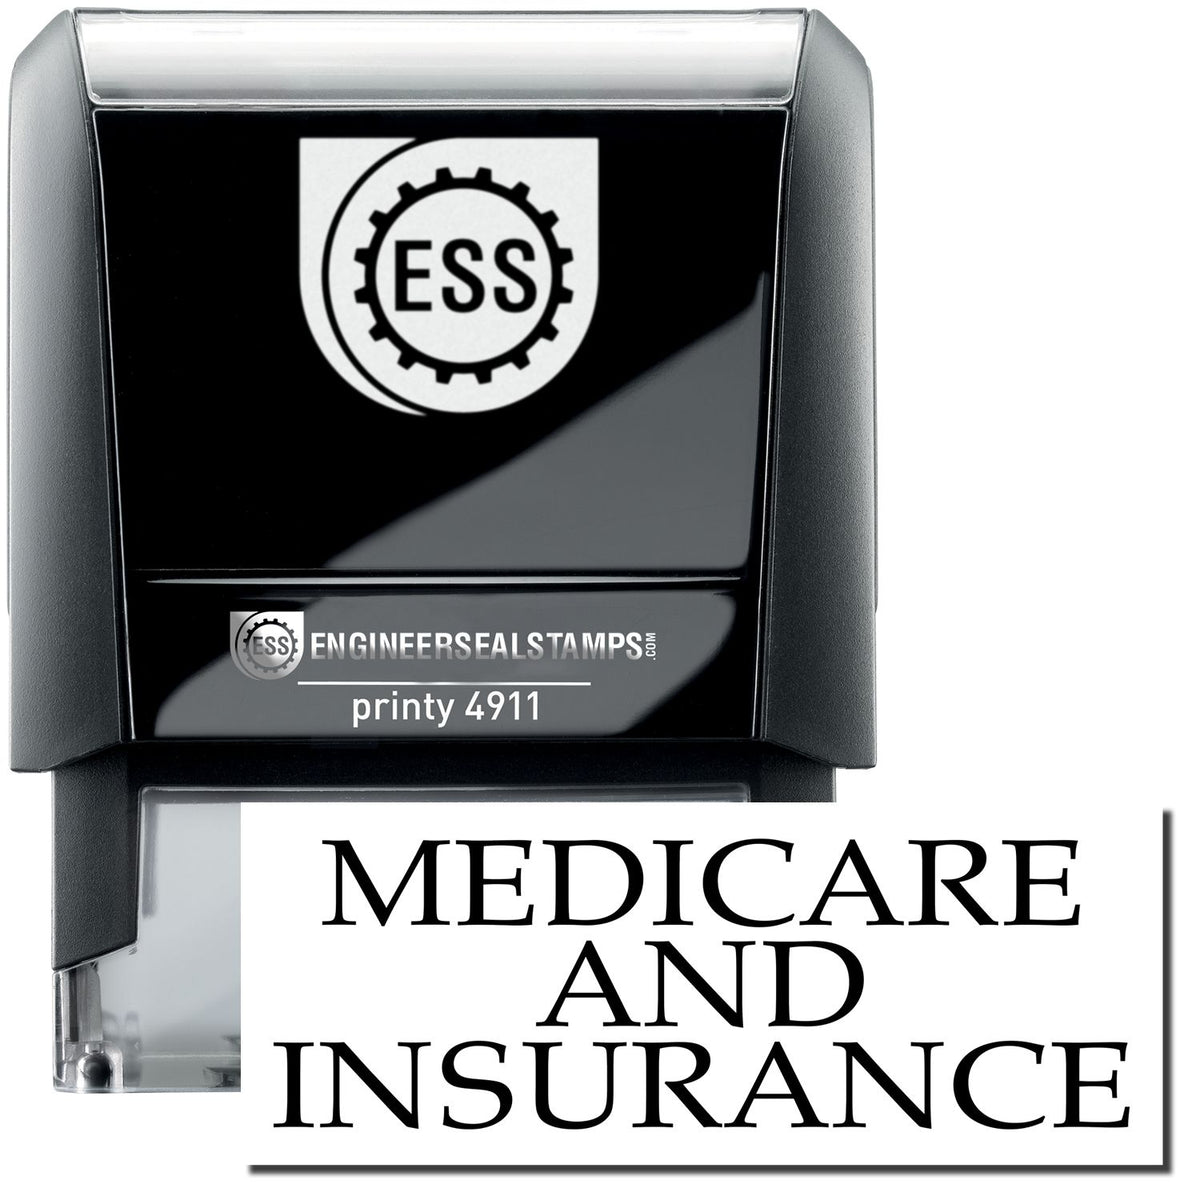 A self-inking stamp with a stamped image showing how the text &quot;MEDICARE AND INSURANCE&quot; is displayed after stamping.